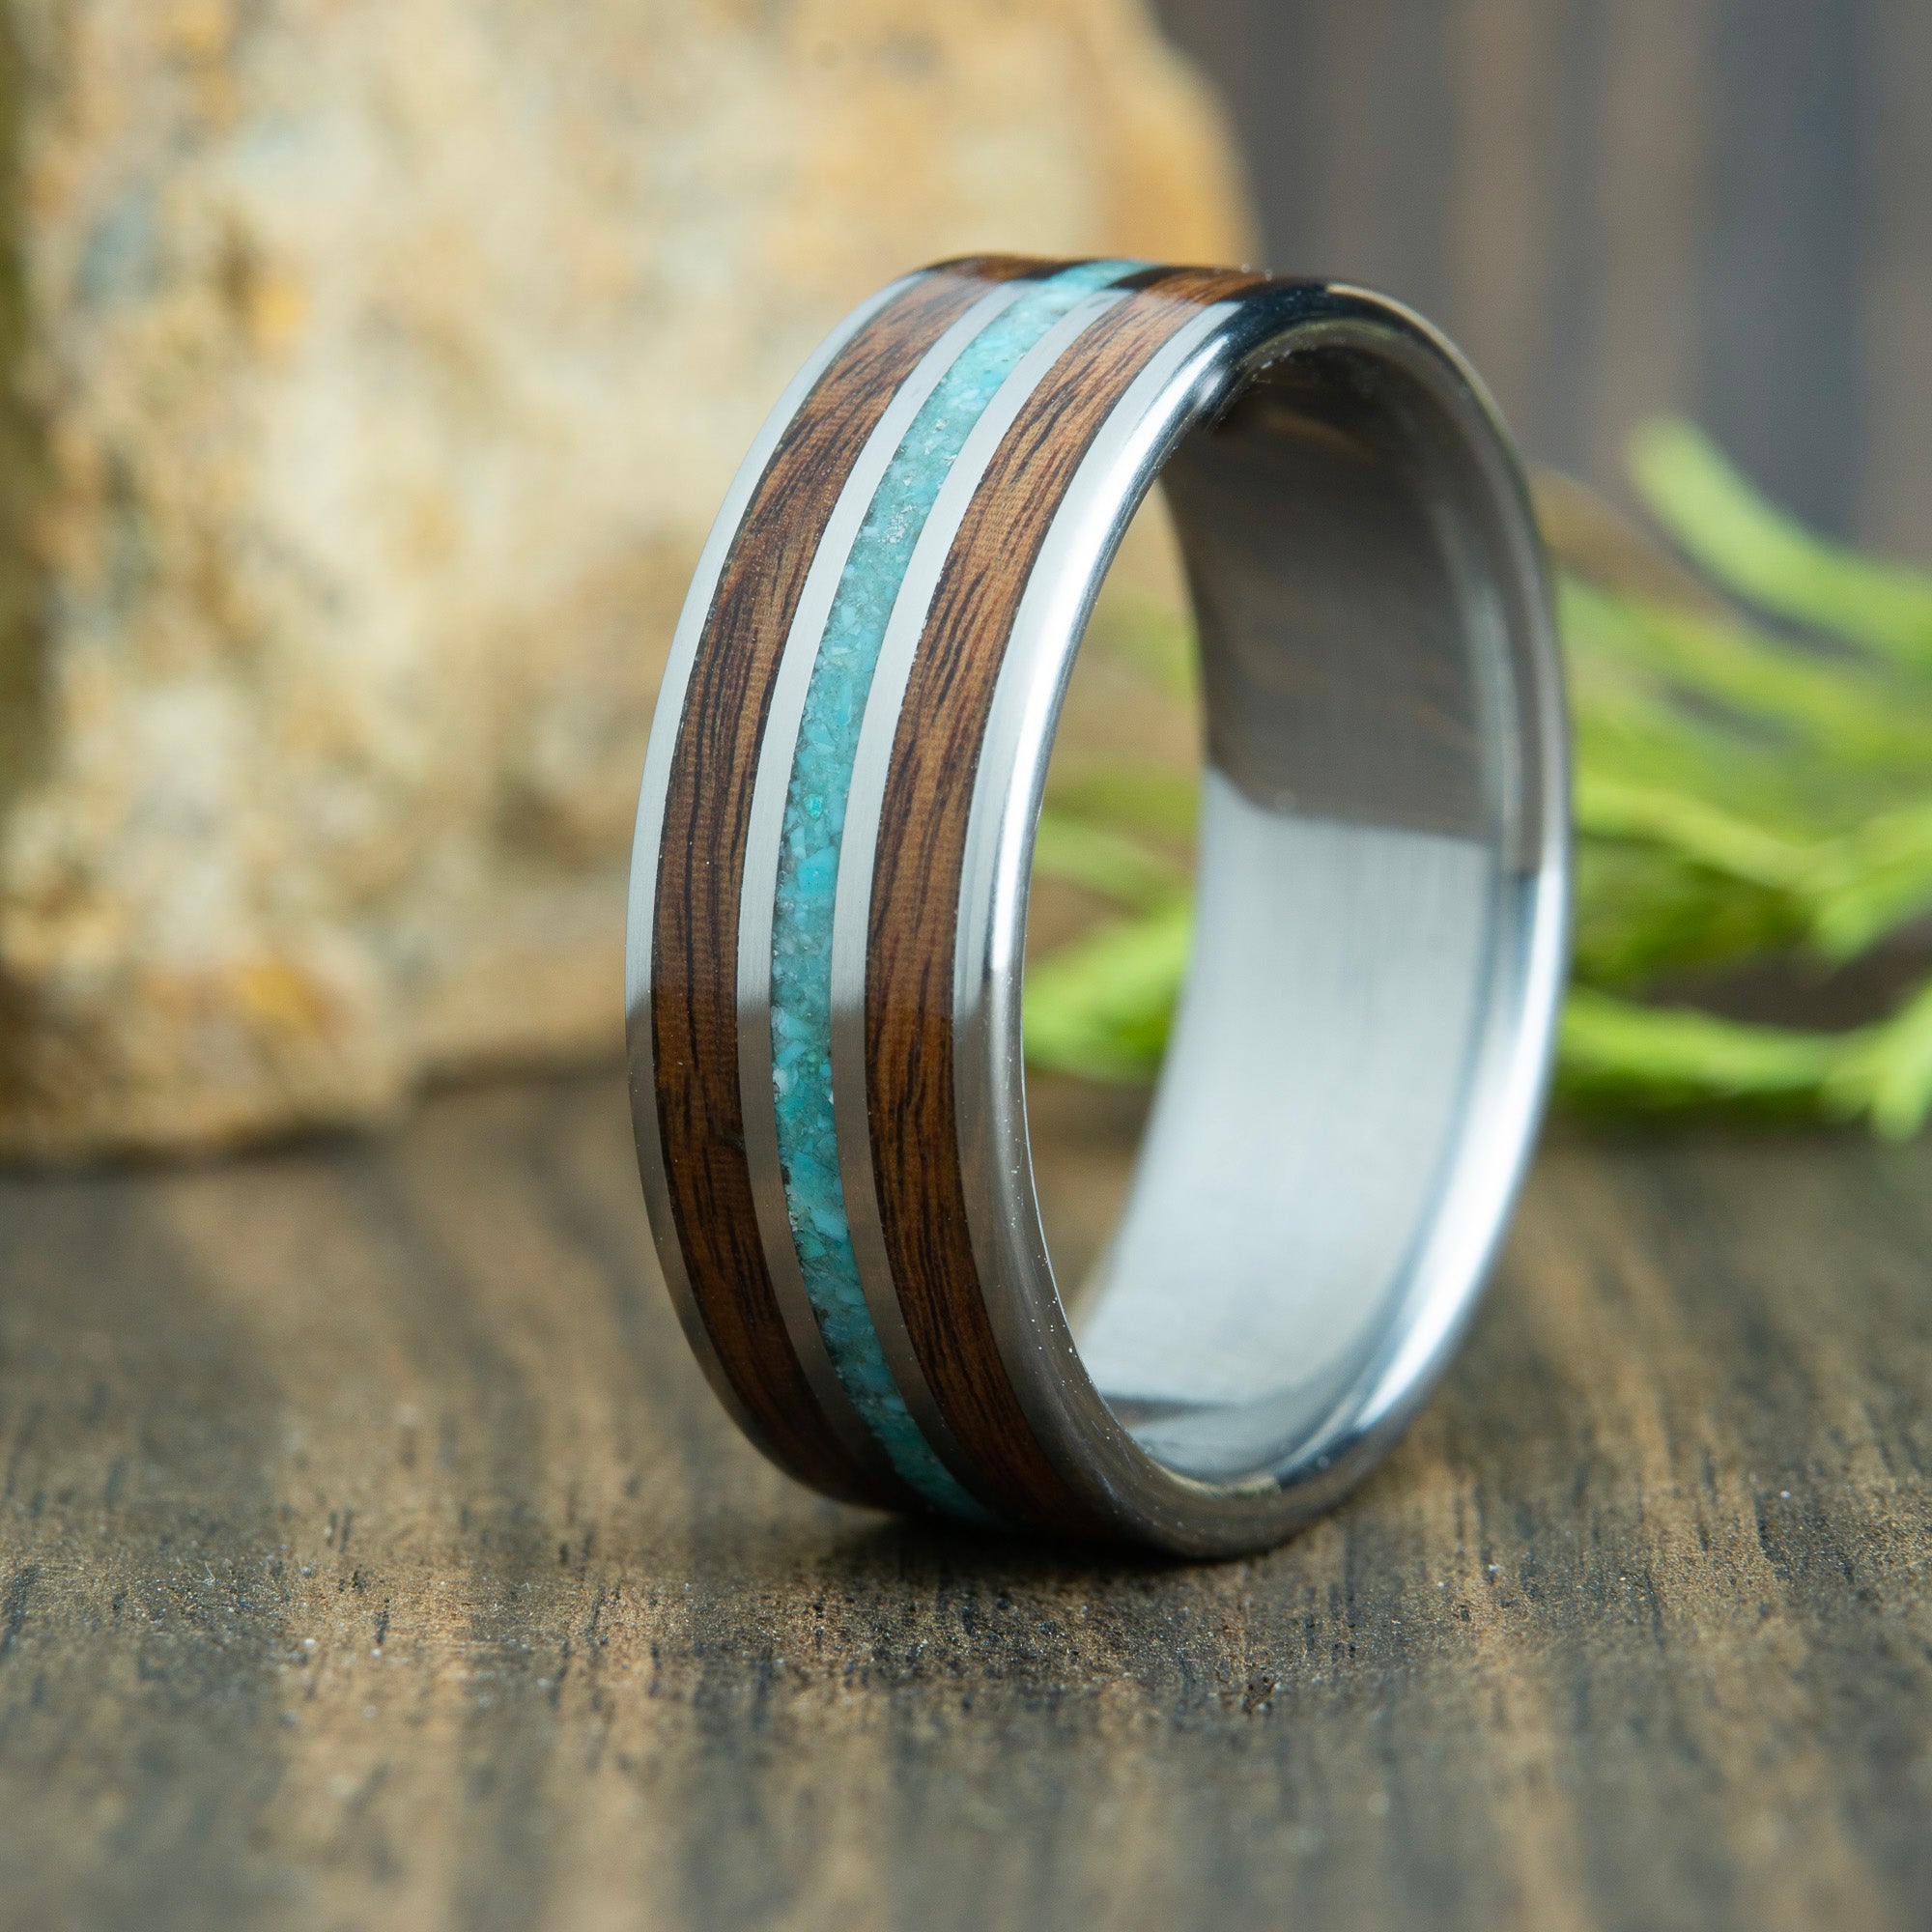 Wooden wedding band with Rosewood and genuine turquoise